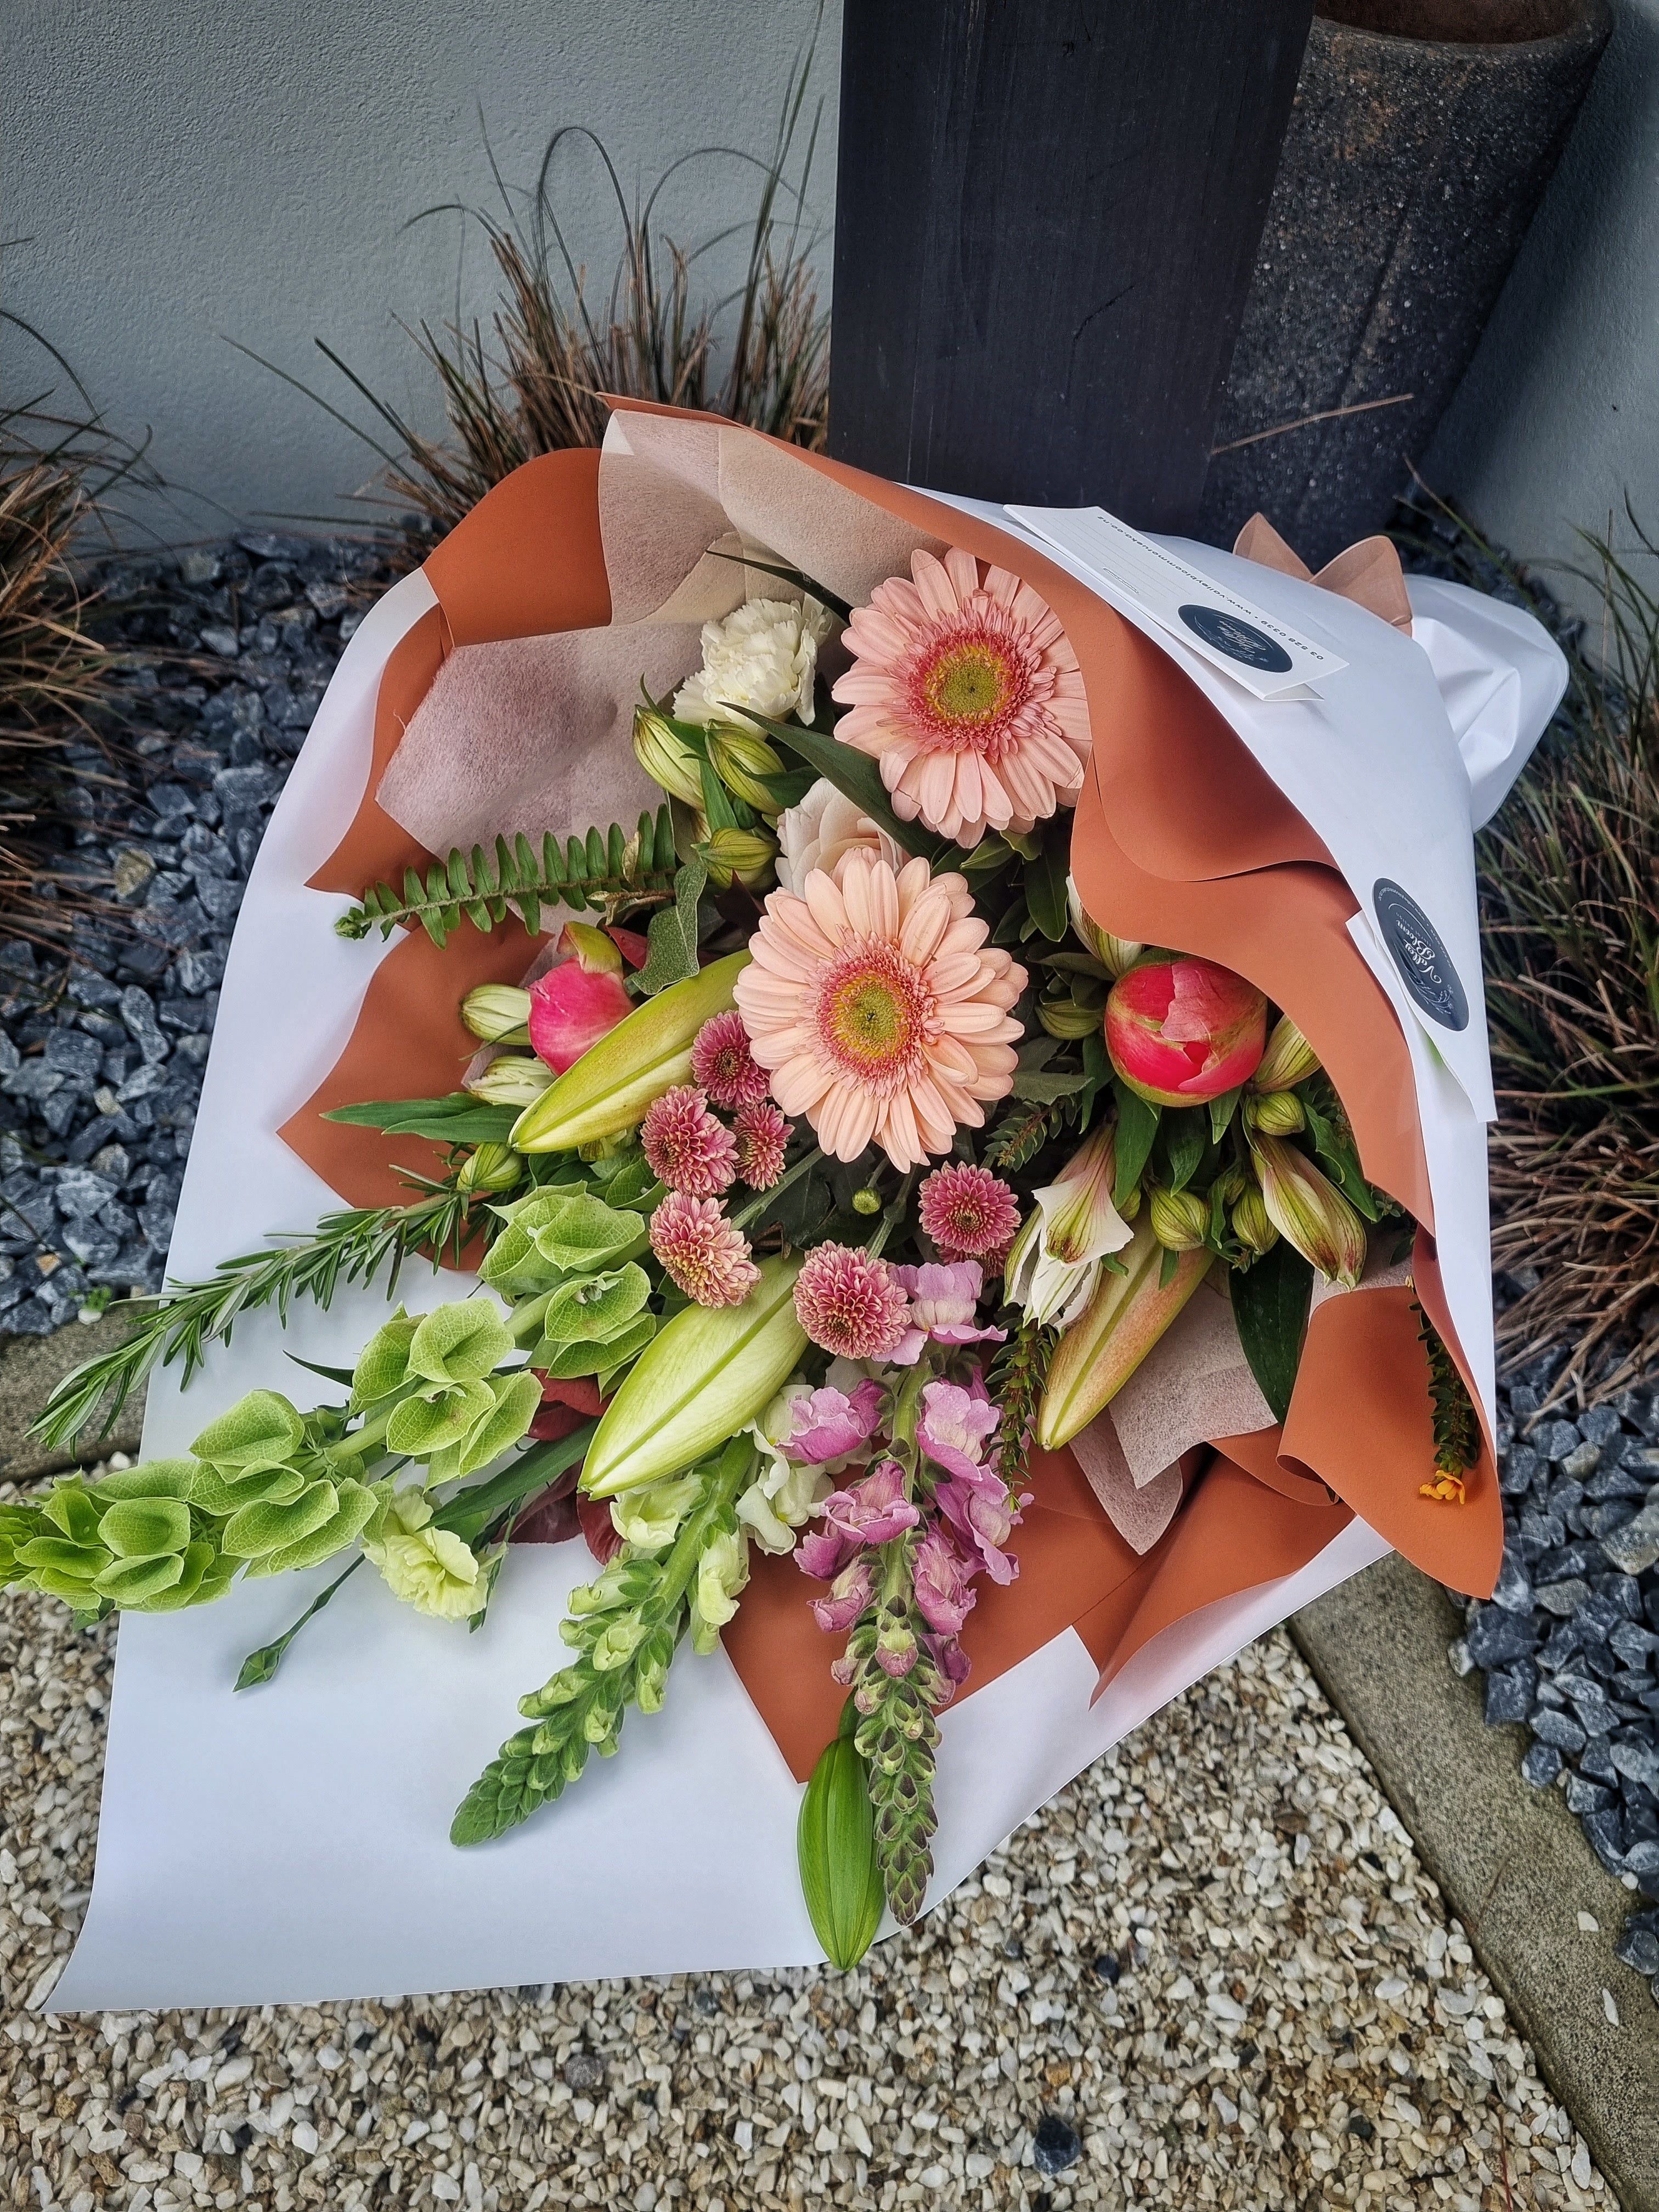 Rustic Bouquet with soft warm-toned flowers with foliage, wrapped in orange and white tissue paper.